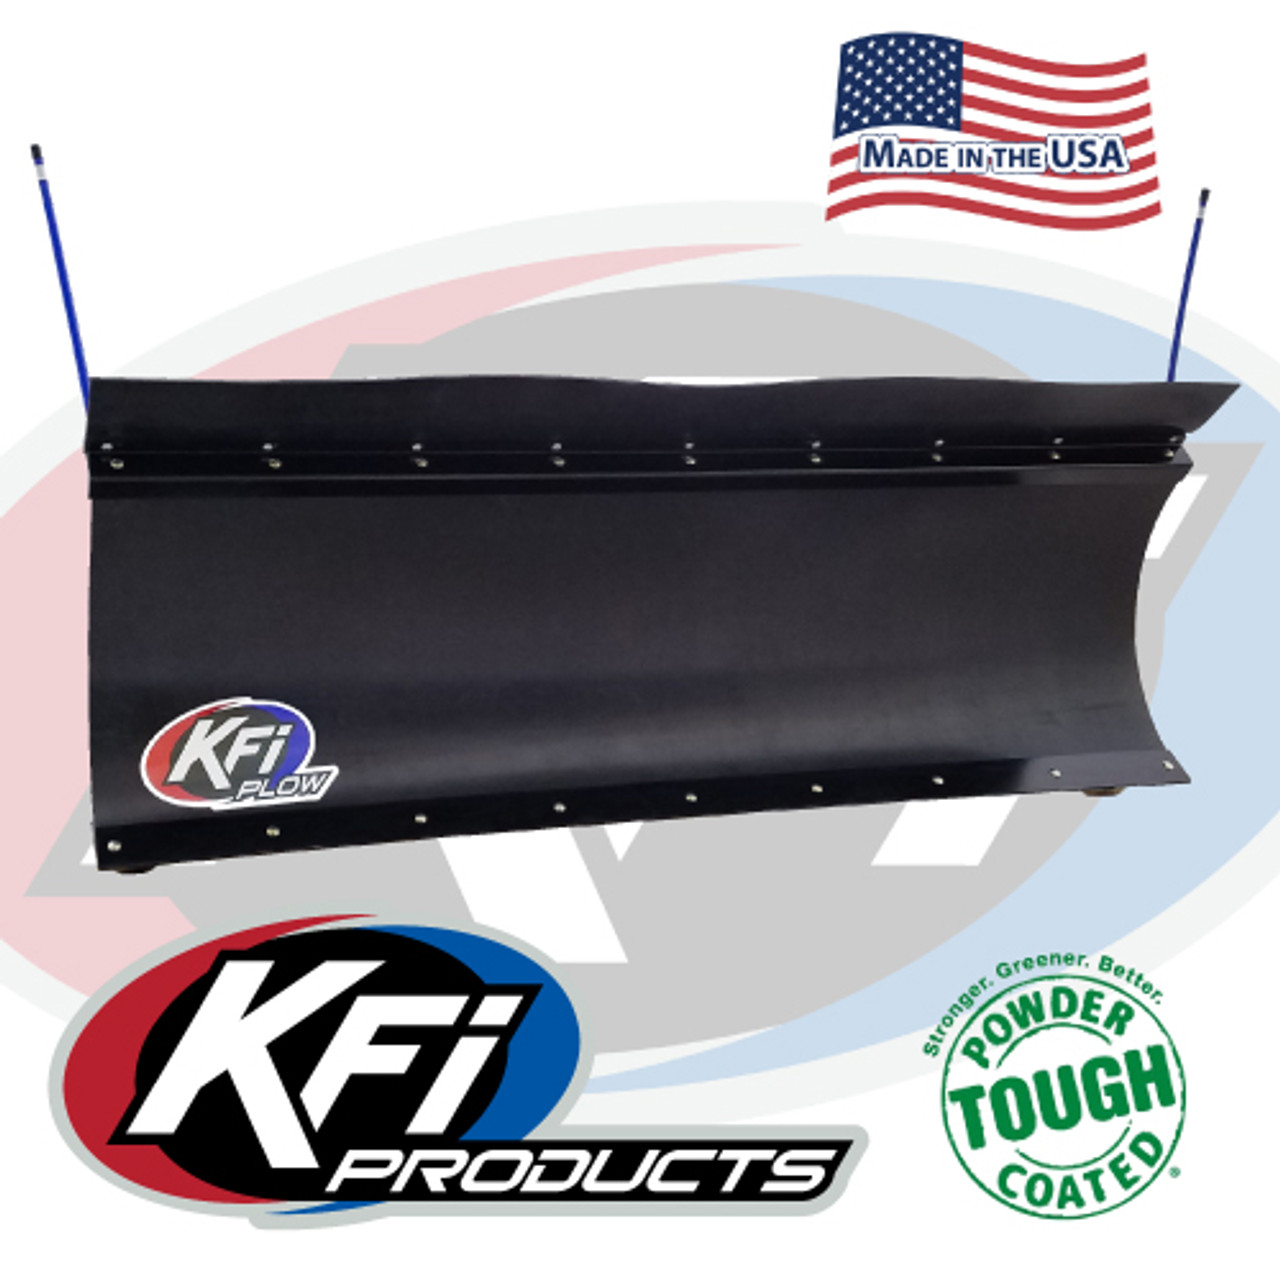 KFI Pro-Poly Series 72" Plow System For Cub Cadet